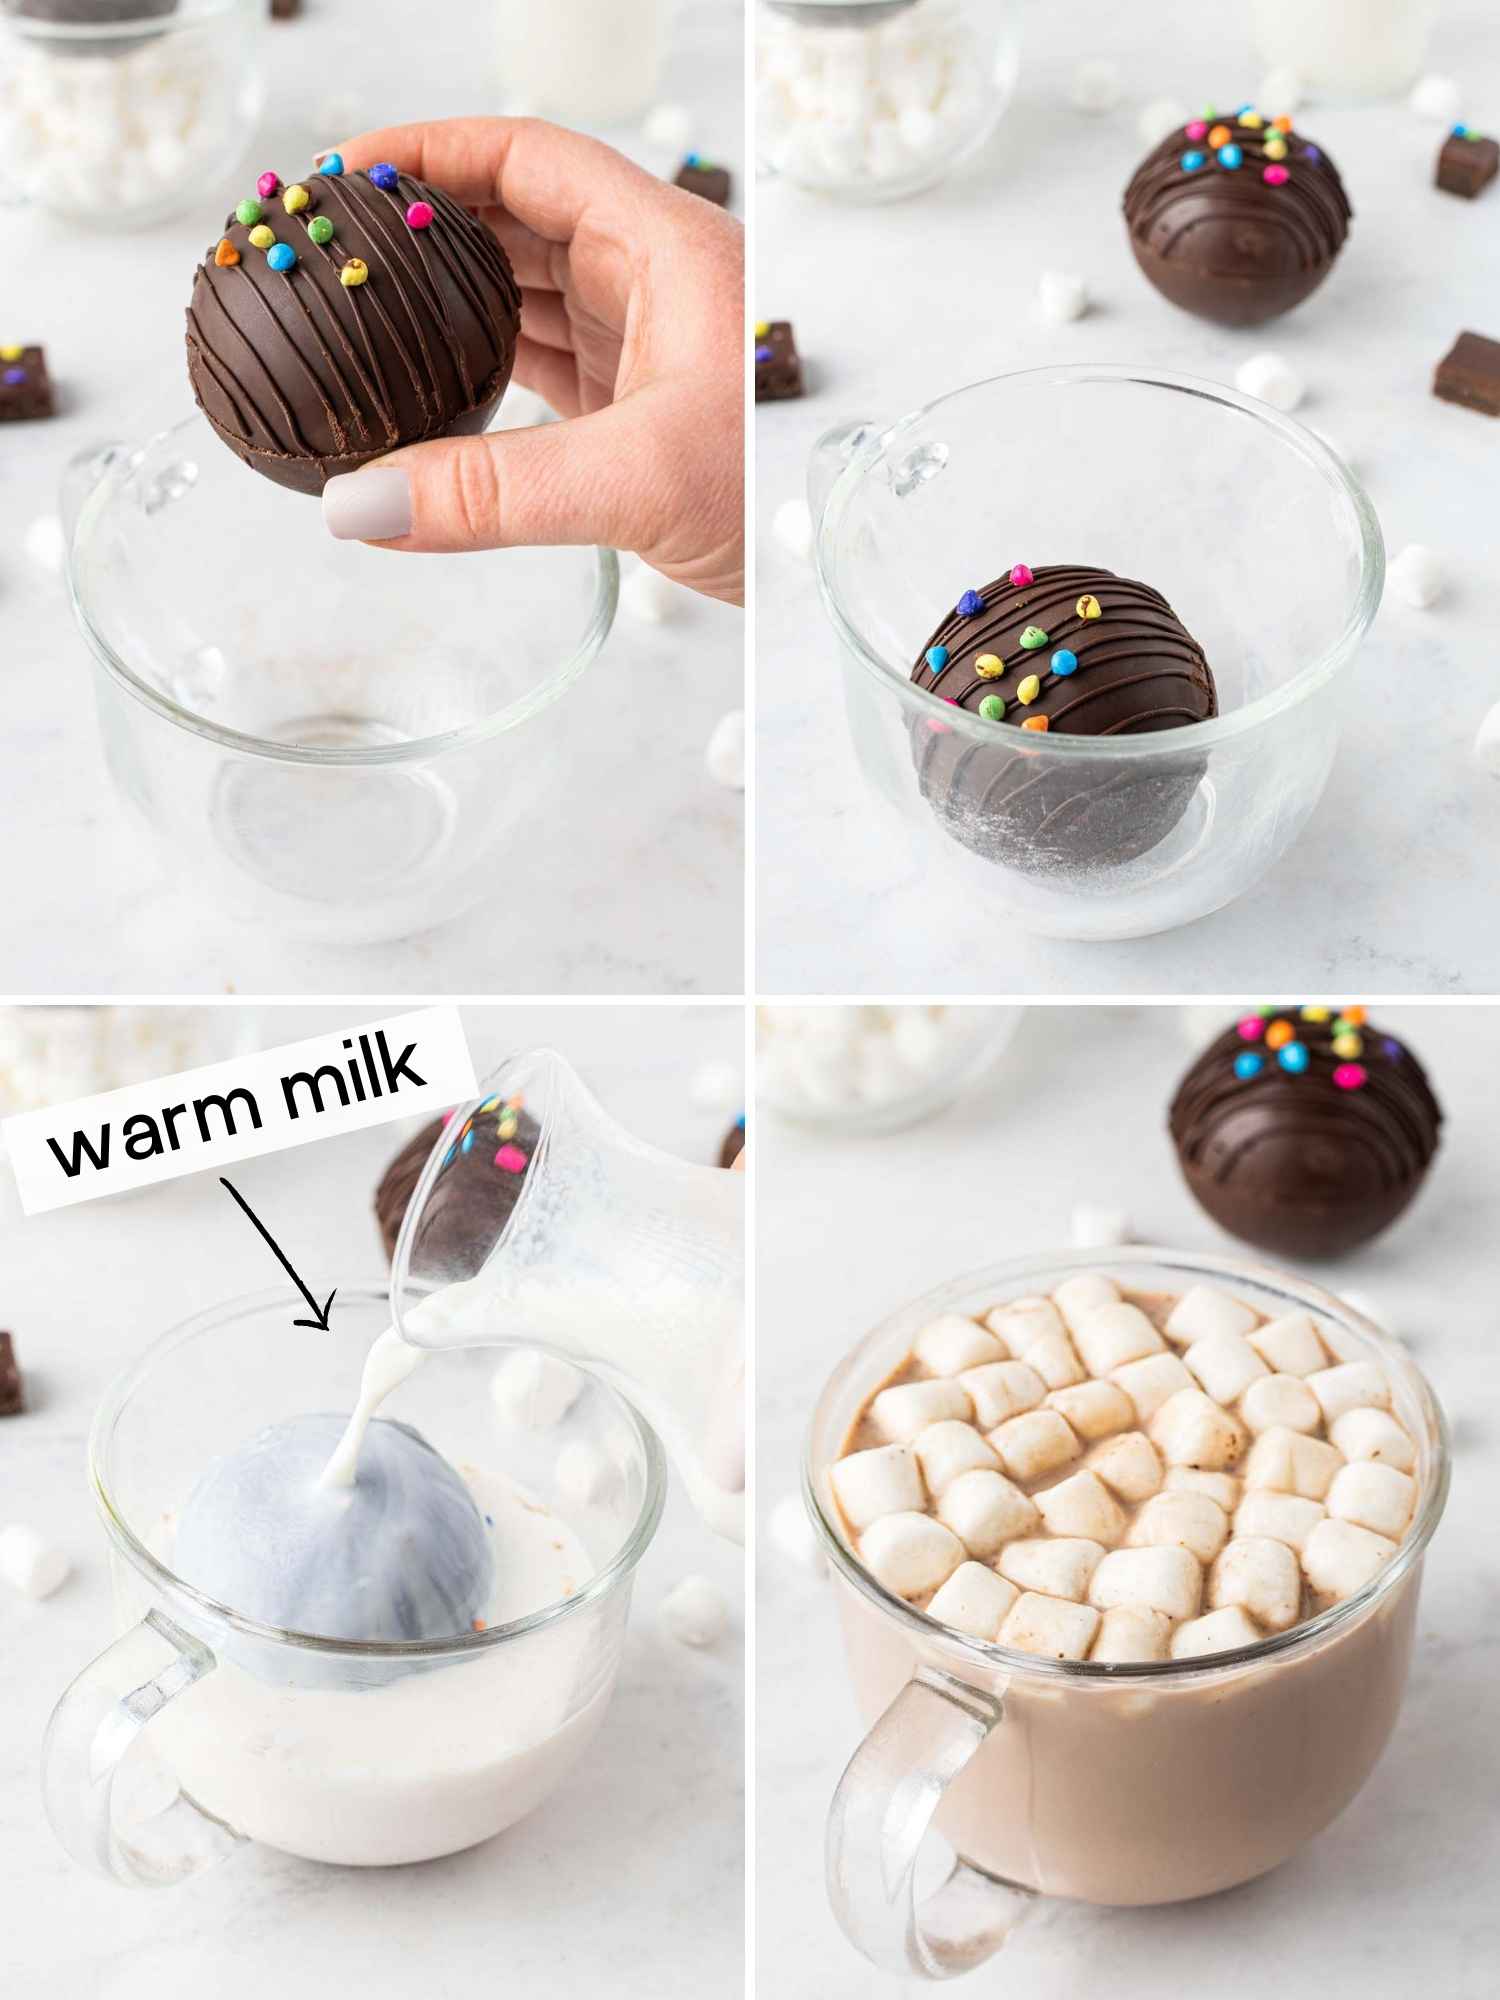 A collage with 4 images on how to make hot chocolate using cocoa bombs